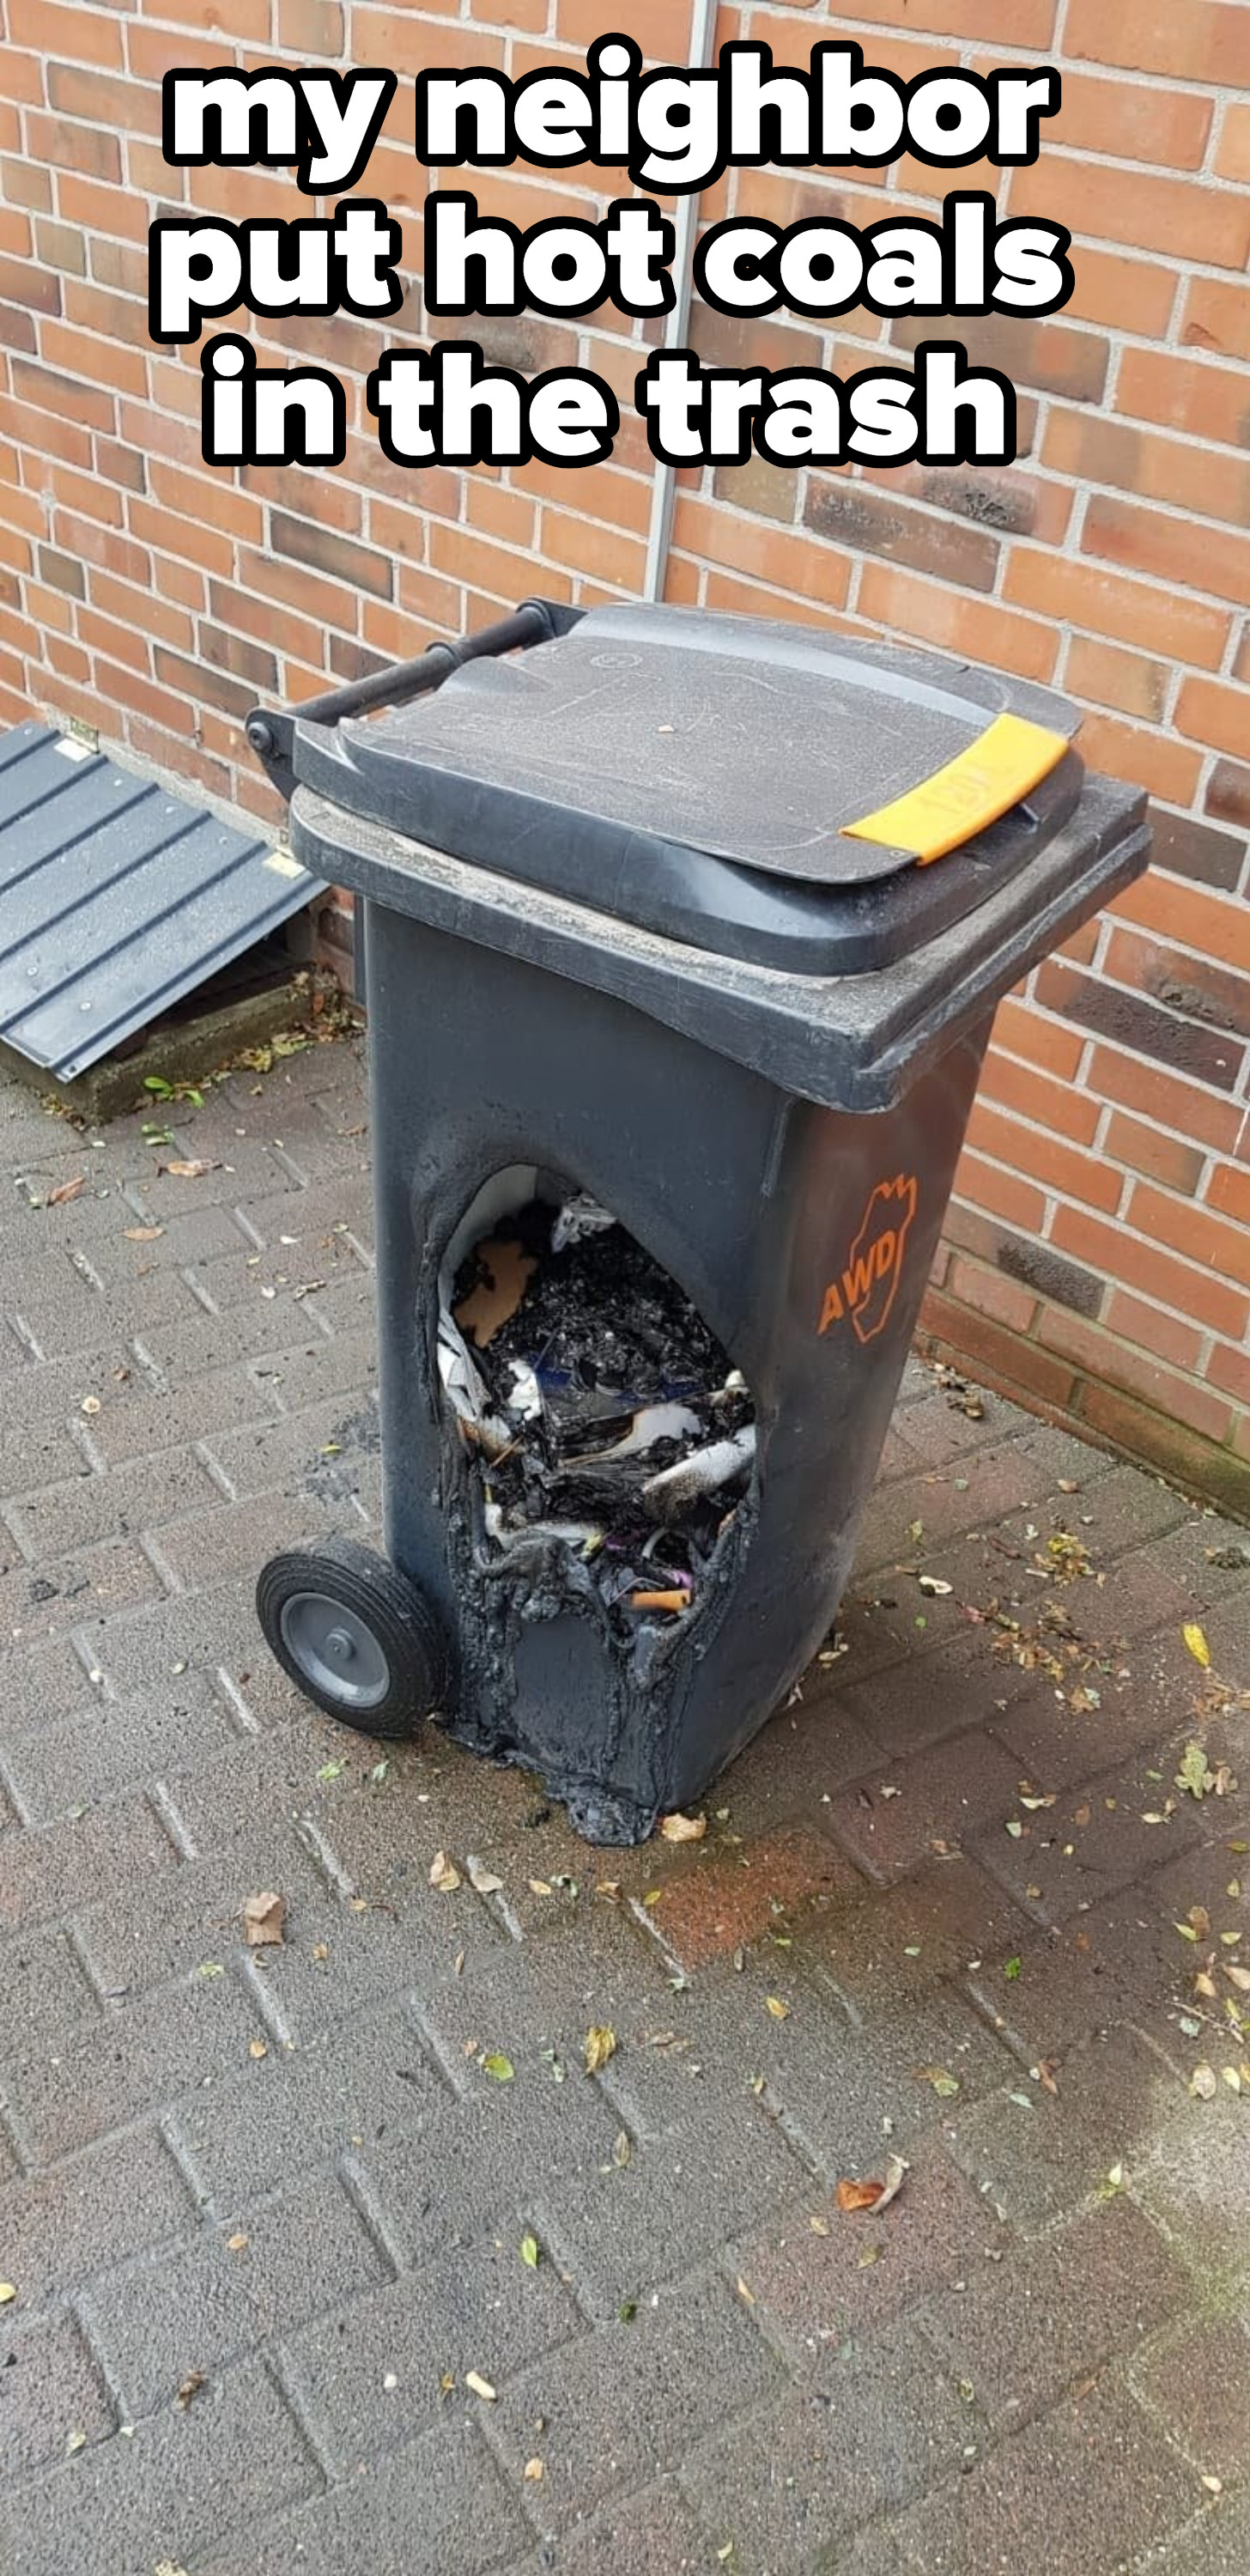 Hot coals in a trash can that caused it to melt